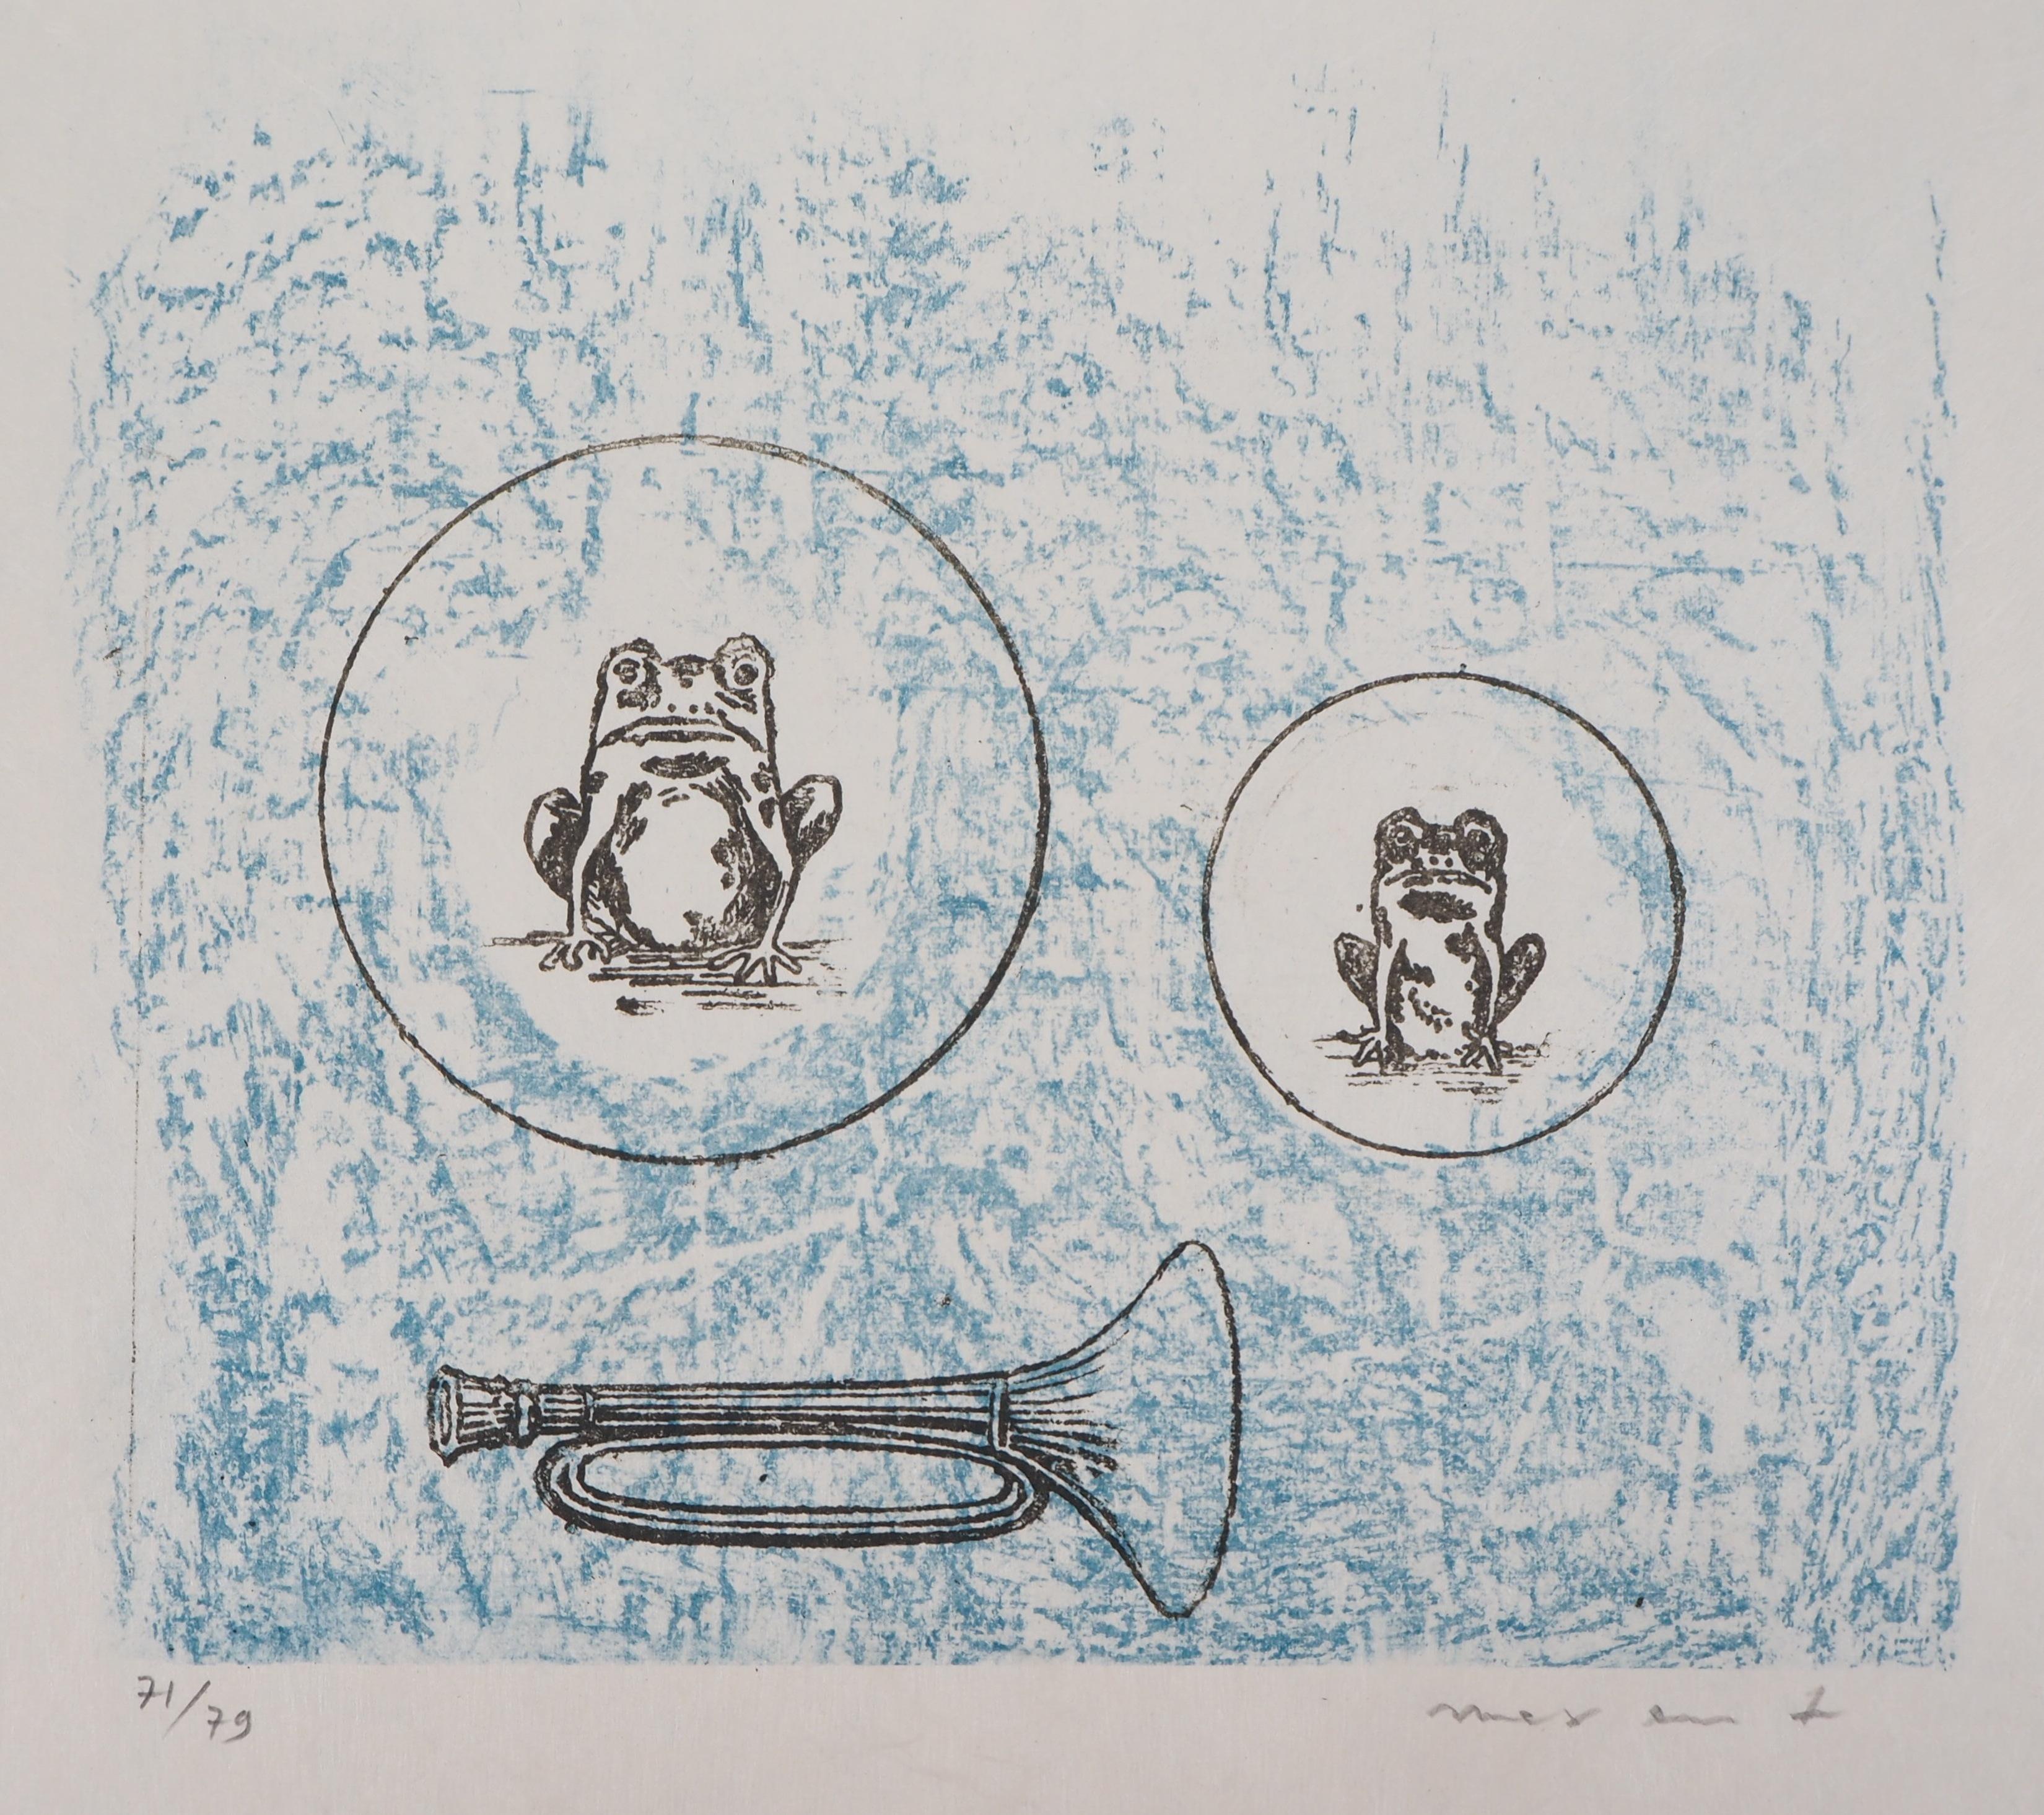 Max Ernst Abstract Print - Two Frogs - Original Lithograph Handsigned and limited 79 copies - Mourlot 1972